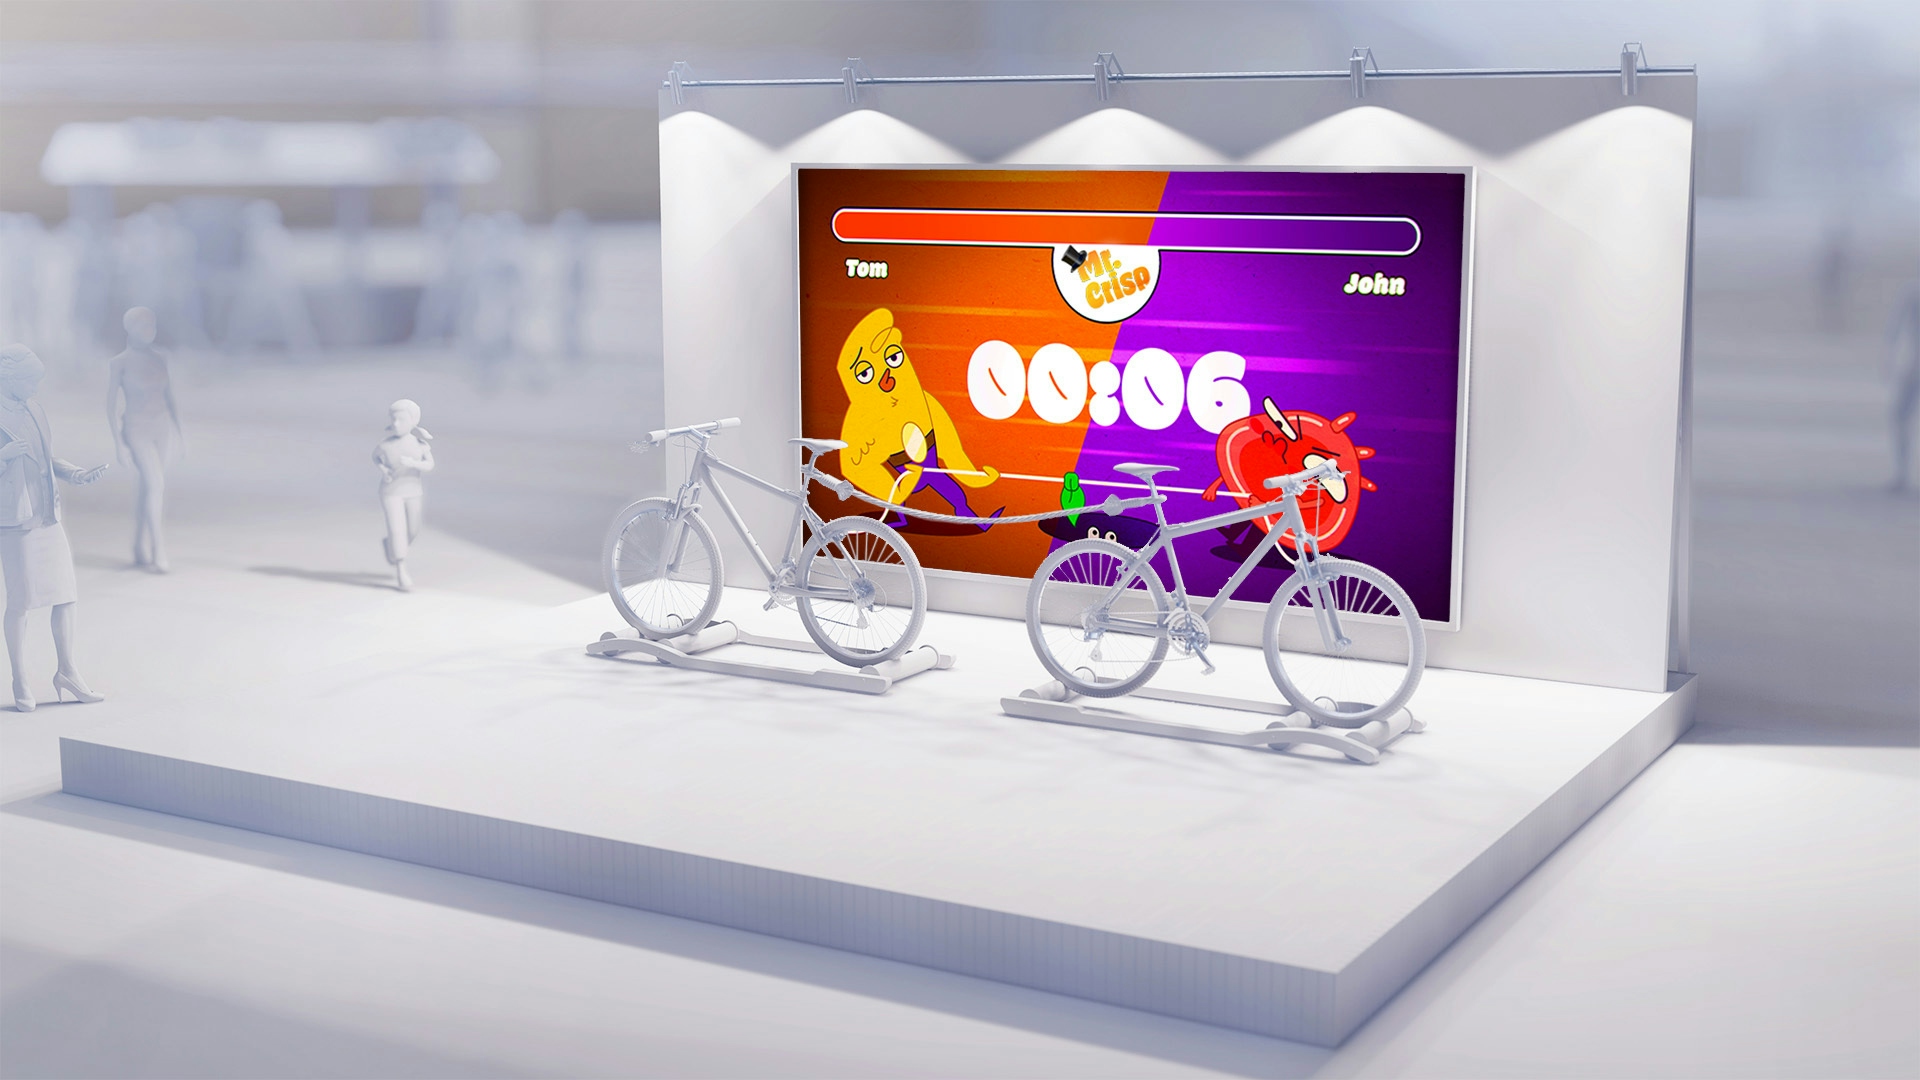 A pedal-powered tug-of-war activation for your next branded event